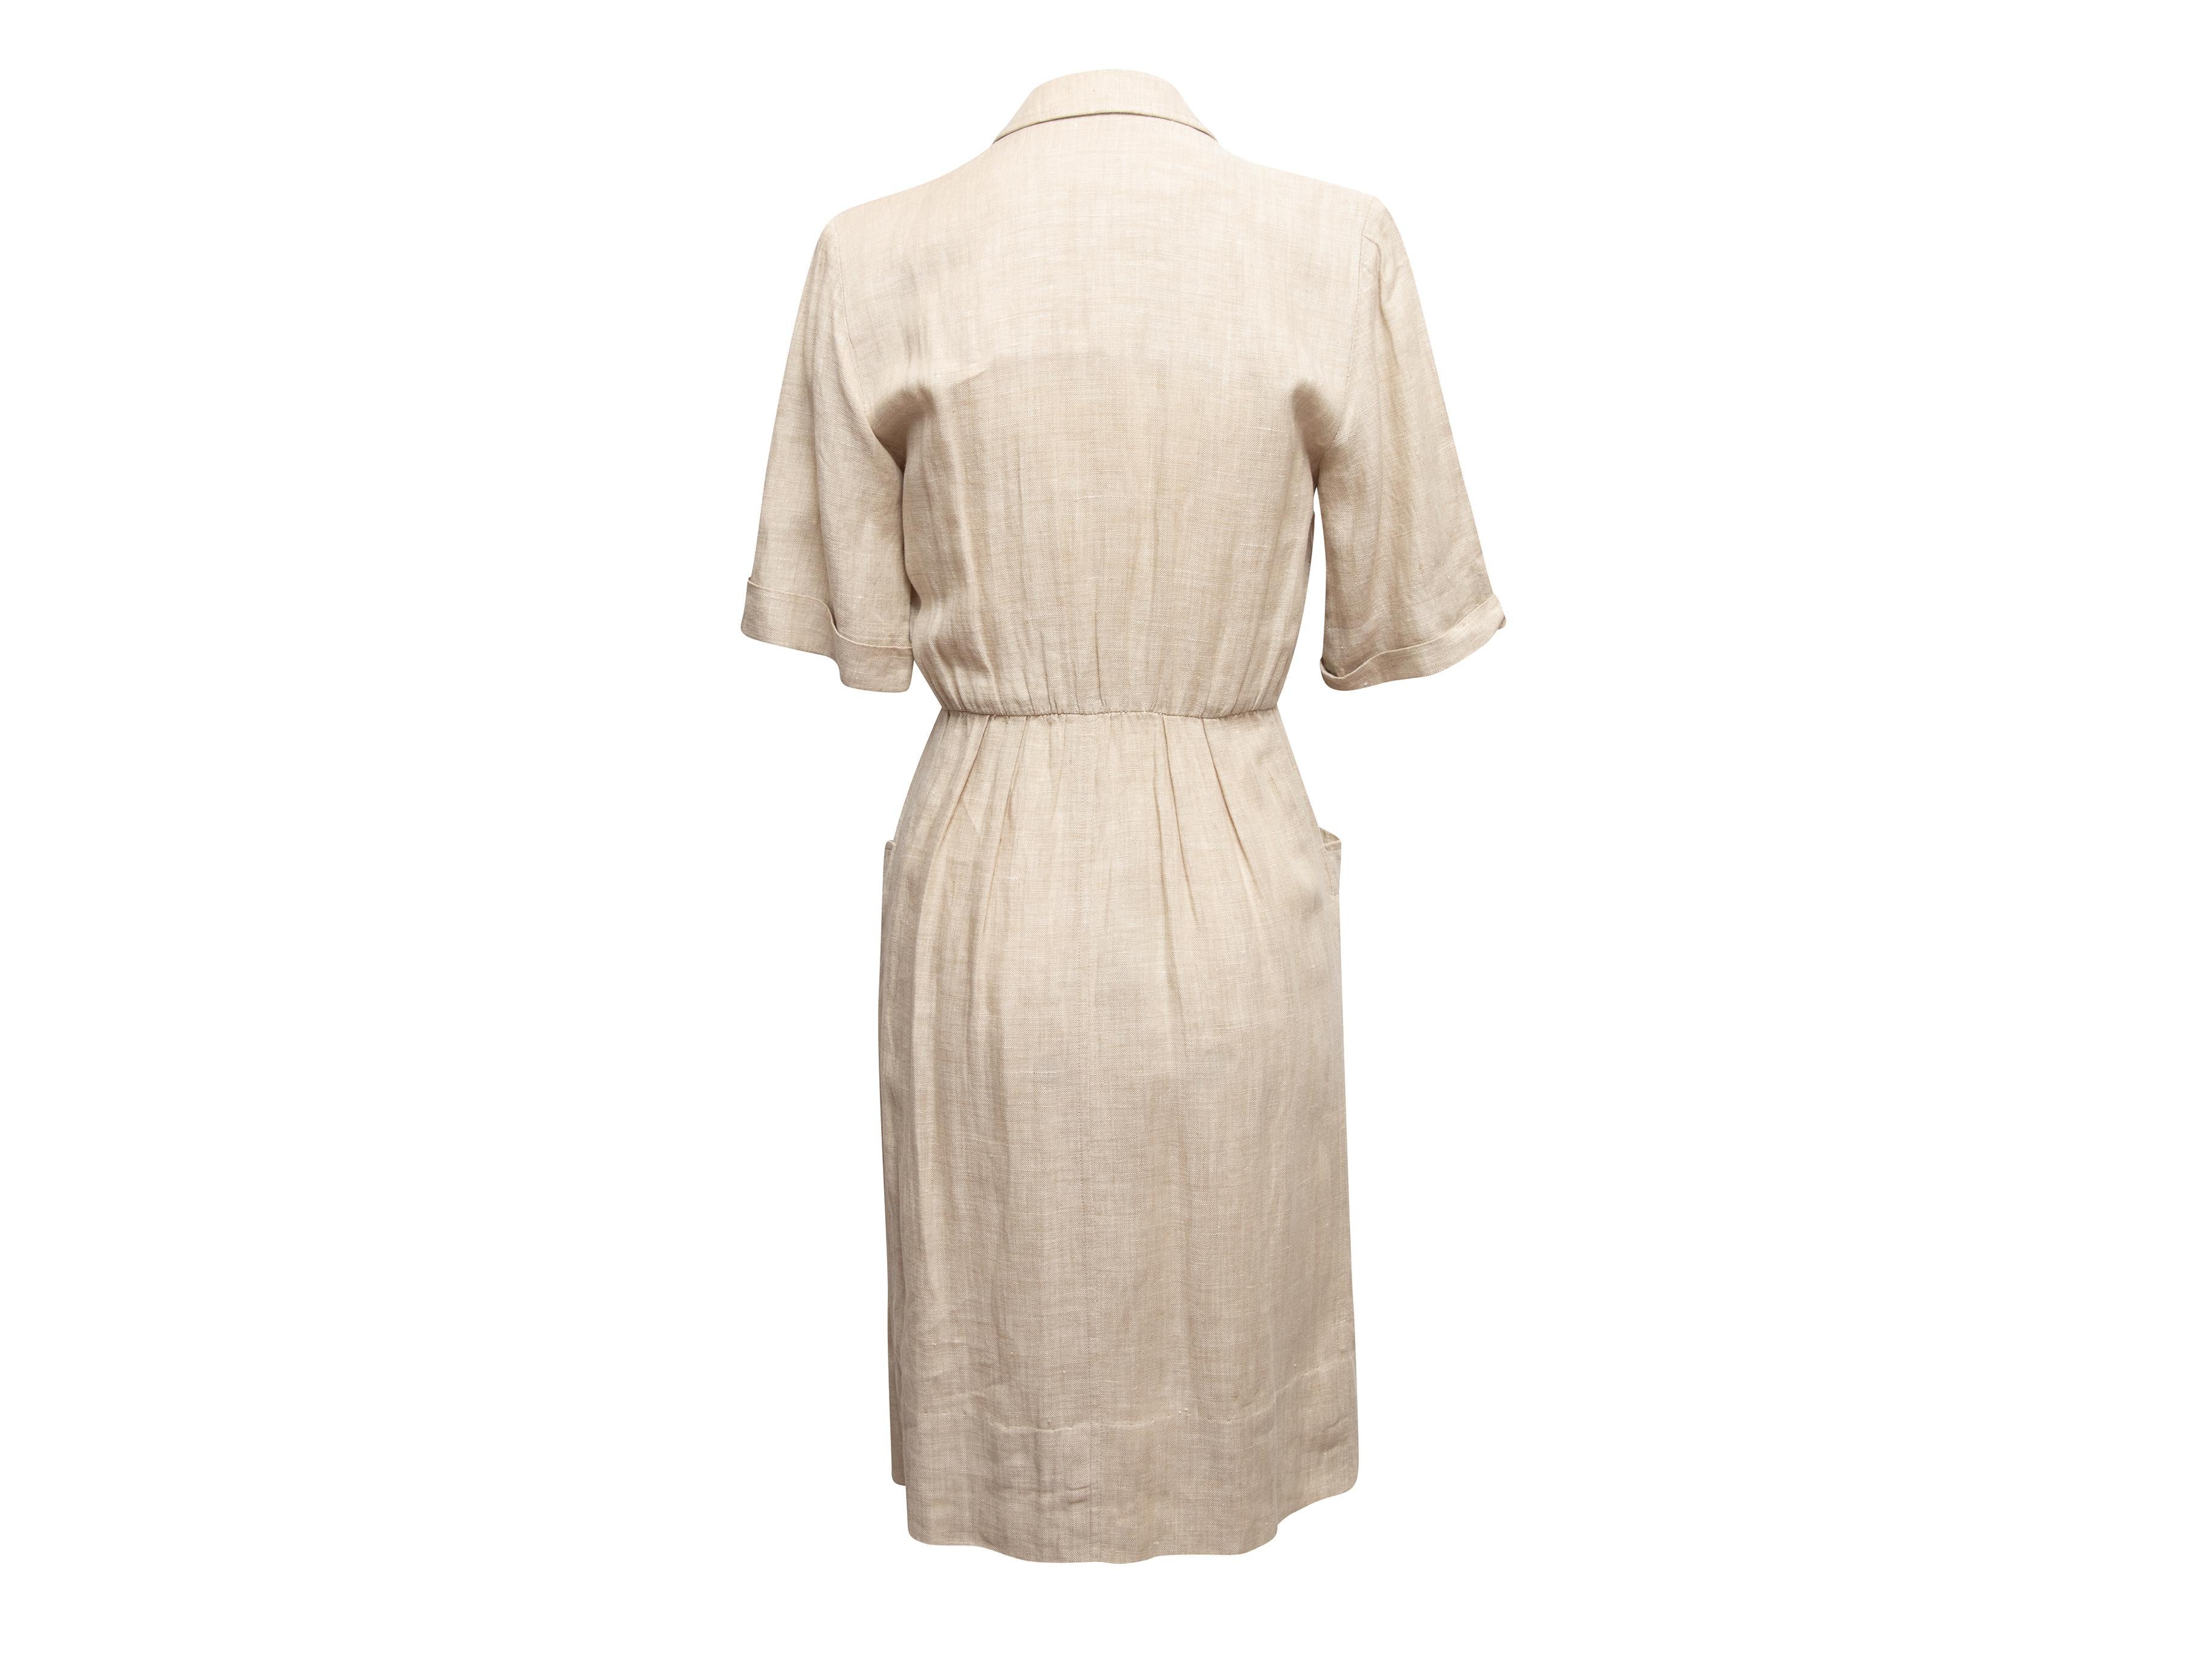 Vintage Beige Yves Saint Laurent Variation 1990s Linen Dress In Good Condition For Sale In New York, NY